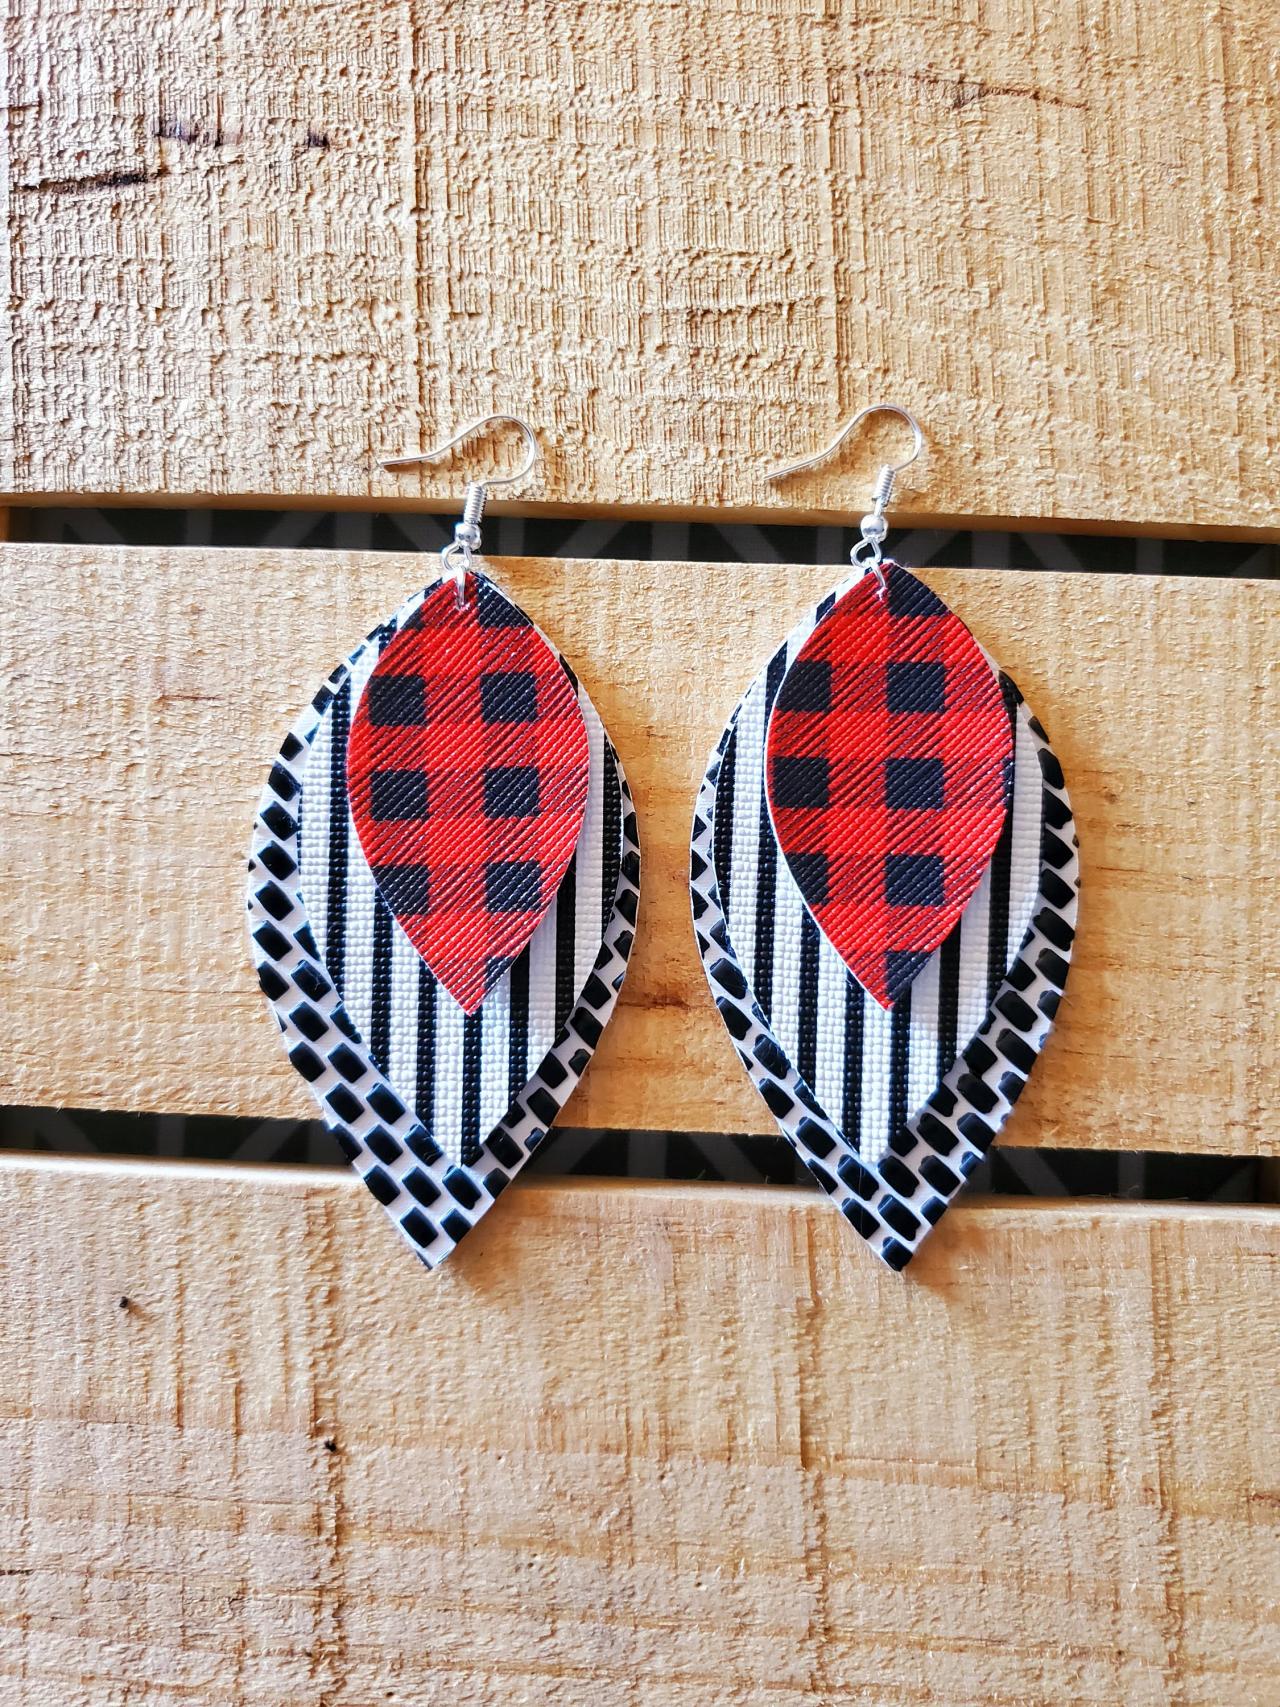 Buffalo Plaid Leather Earrings, Red Black And White Earrings, Buffalo Check Leather, Triple Layer Leather Earrings, Leaf Shape Earrings,